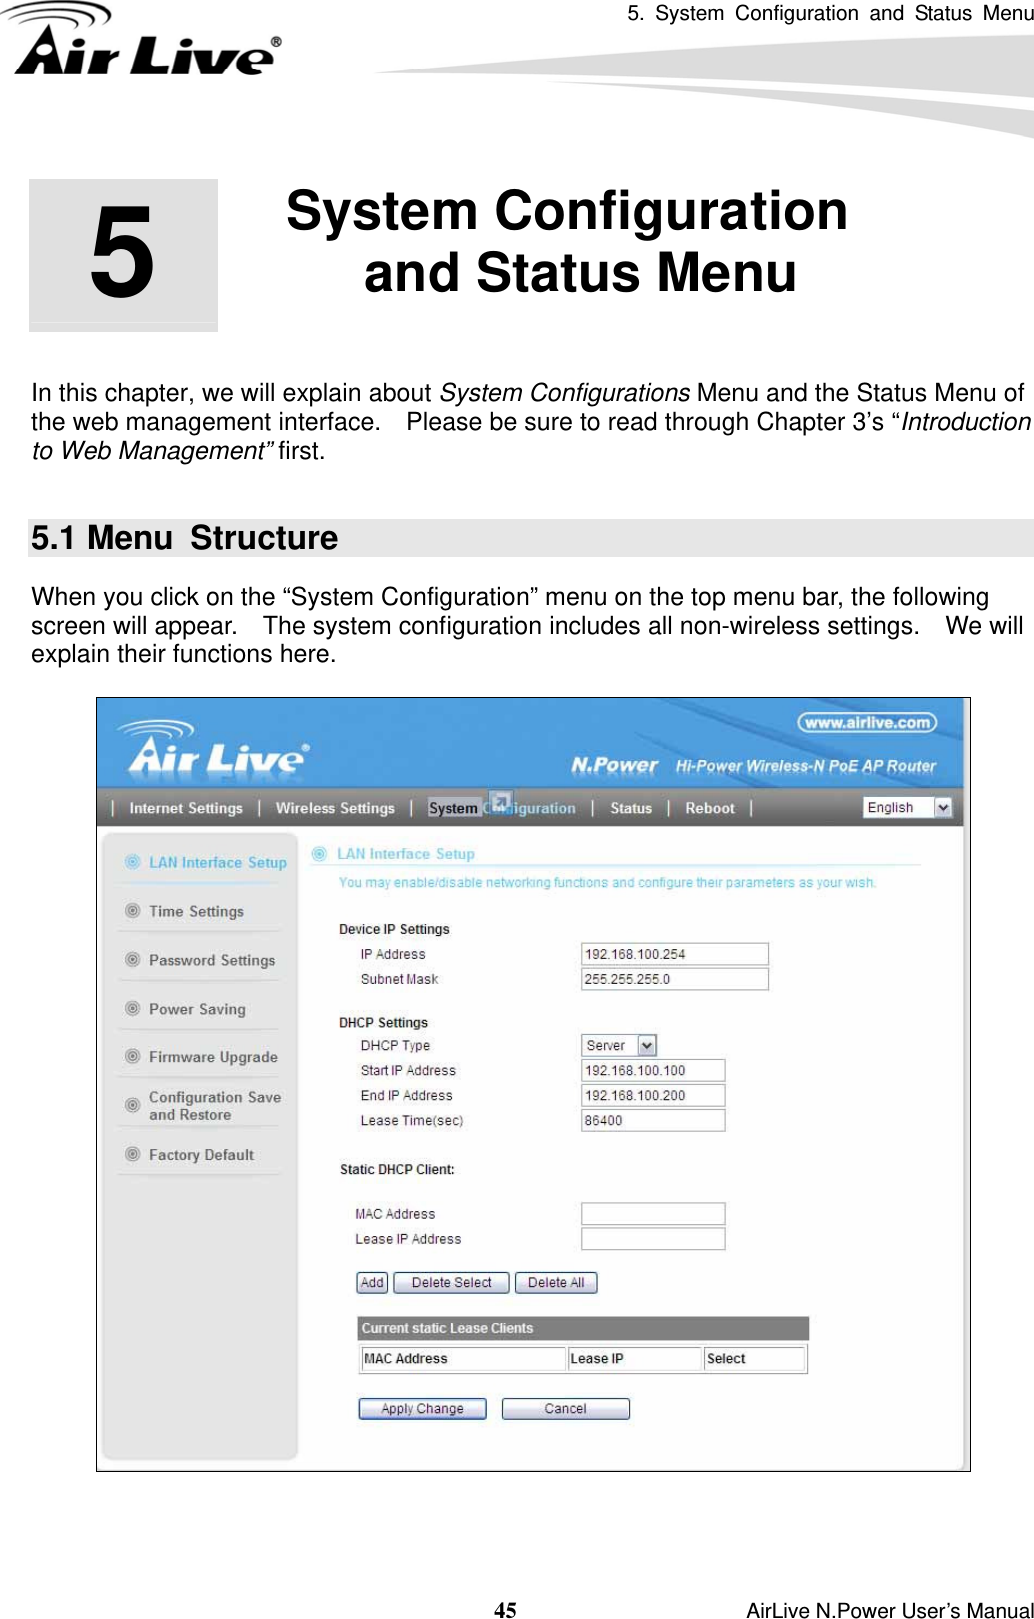 5. System Configuration and Status Menu  45                    AirLive N.Power User’s Manual         In this chapter, we will explain about System Configurations Menu and the Status Menu of the web management interface.    Please be sure to read through Chapter 3’s “Introduction to Web Management” first.  5.1 Menu  Structure When you click on the “System Configuration” menu on the top menu bar, the following screen will appear.    The system configuration includes all non-wireless settings.    We will explain their functions here.      5  5. System Configuration and Status Menu  